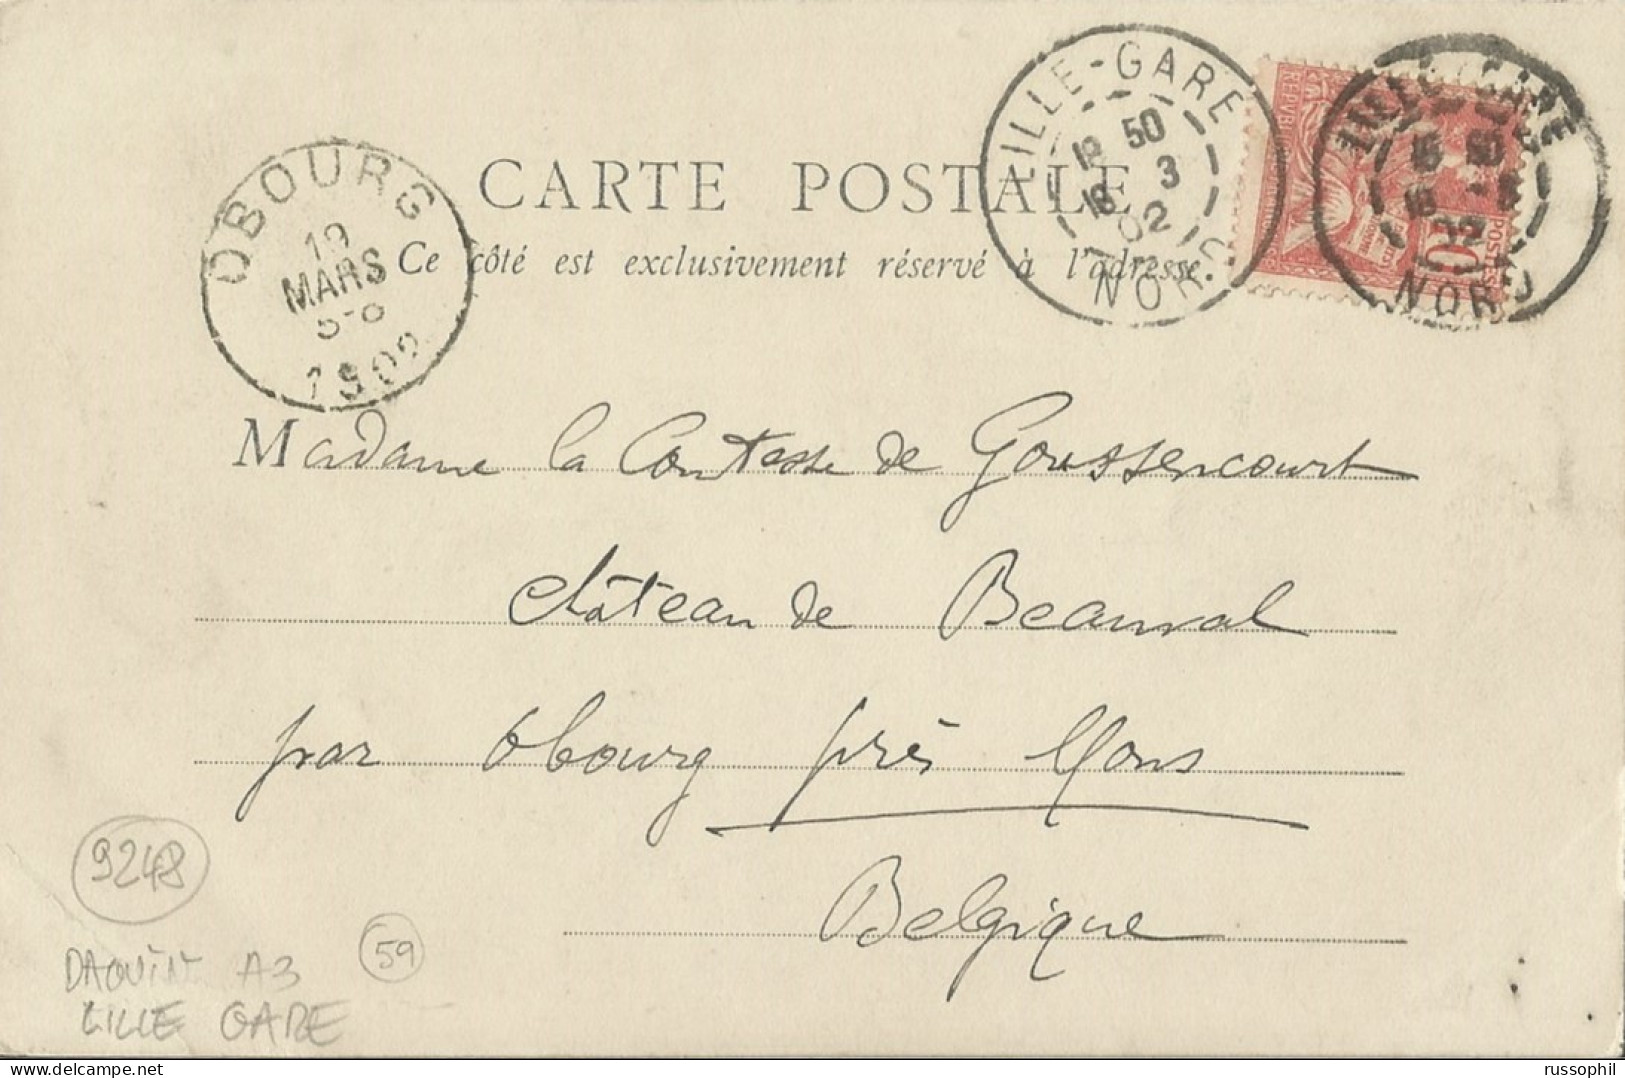 FRANCE - 59 - A3 PAIRED DAGUIN LIILE GARE - 1 CDS LARGE & 1 CDS SMALL CAPS LETTER - 1902 - Lettres & Documents